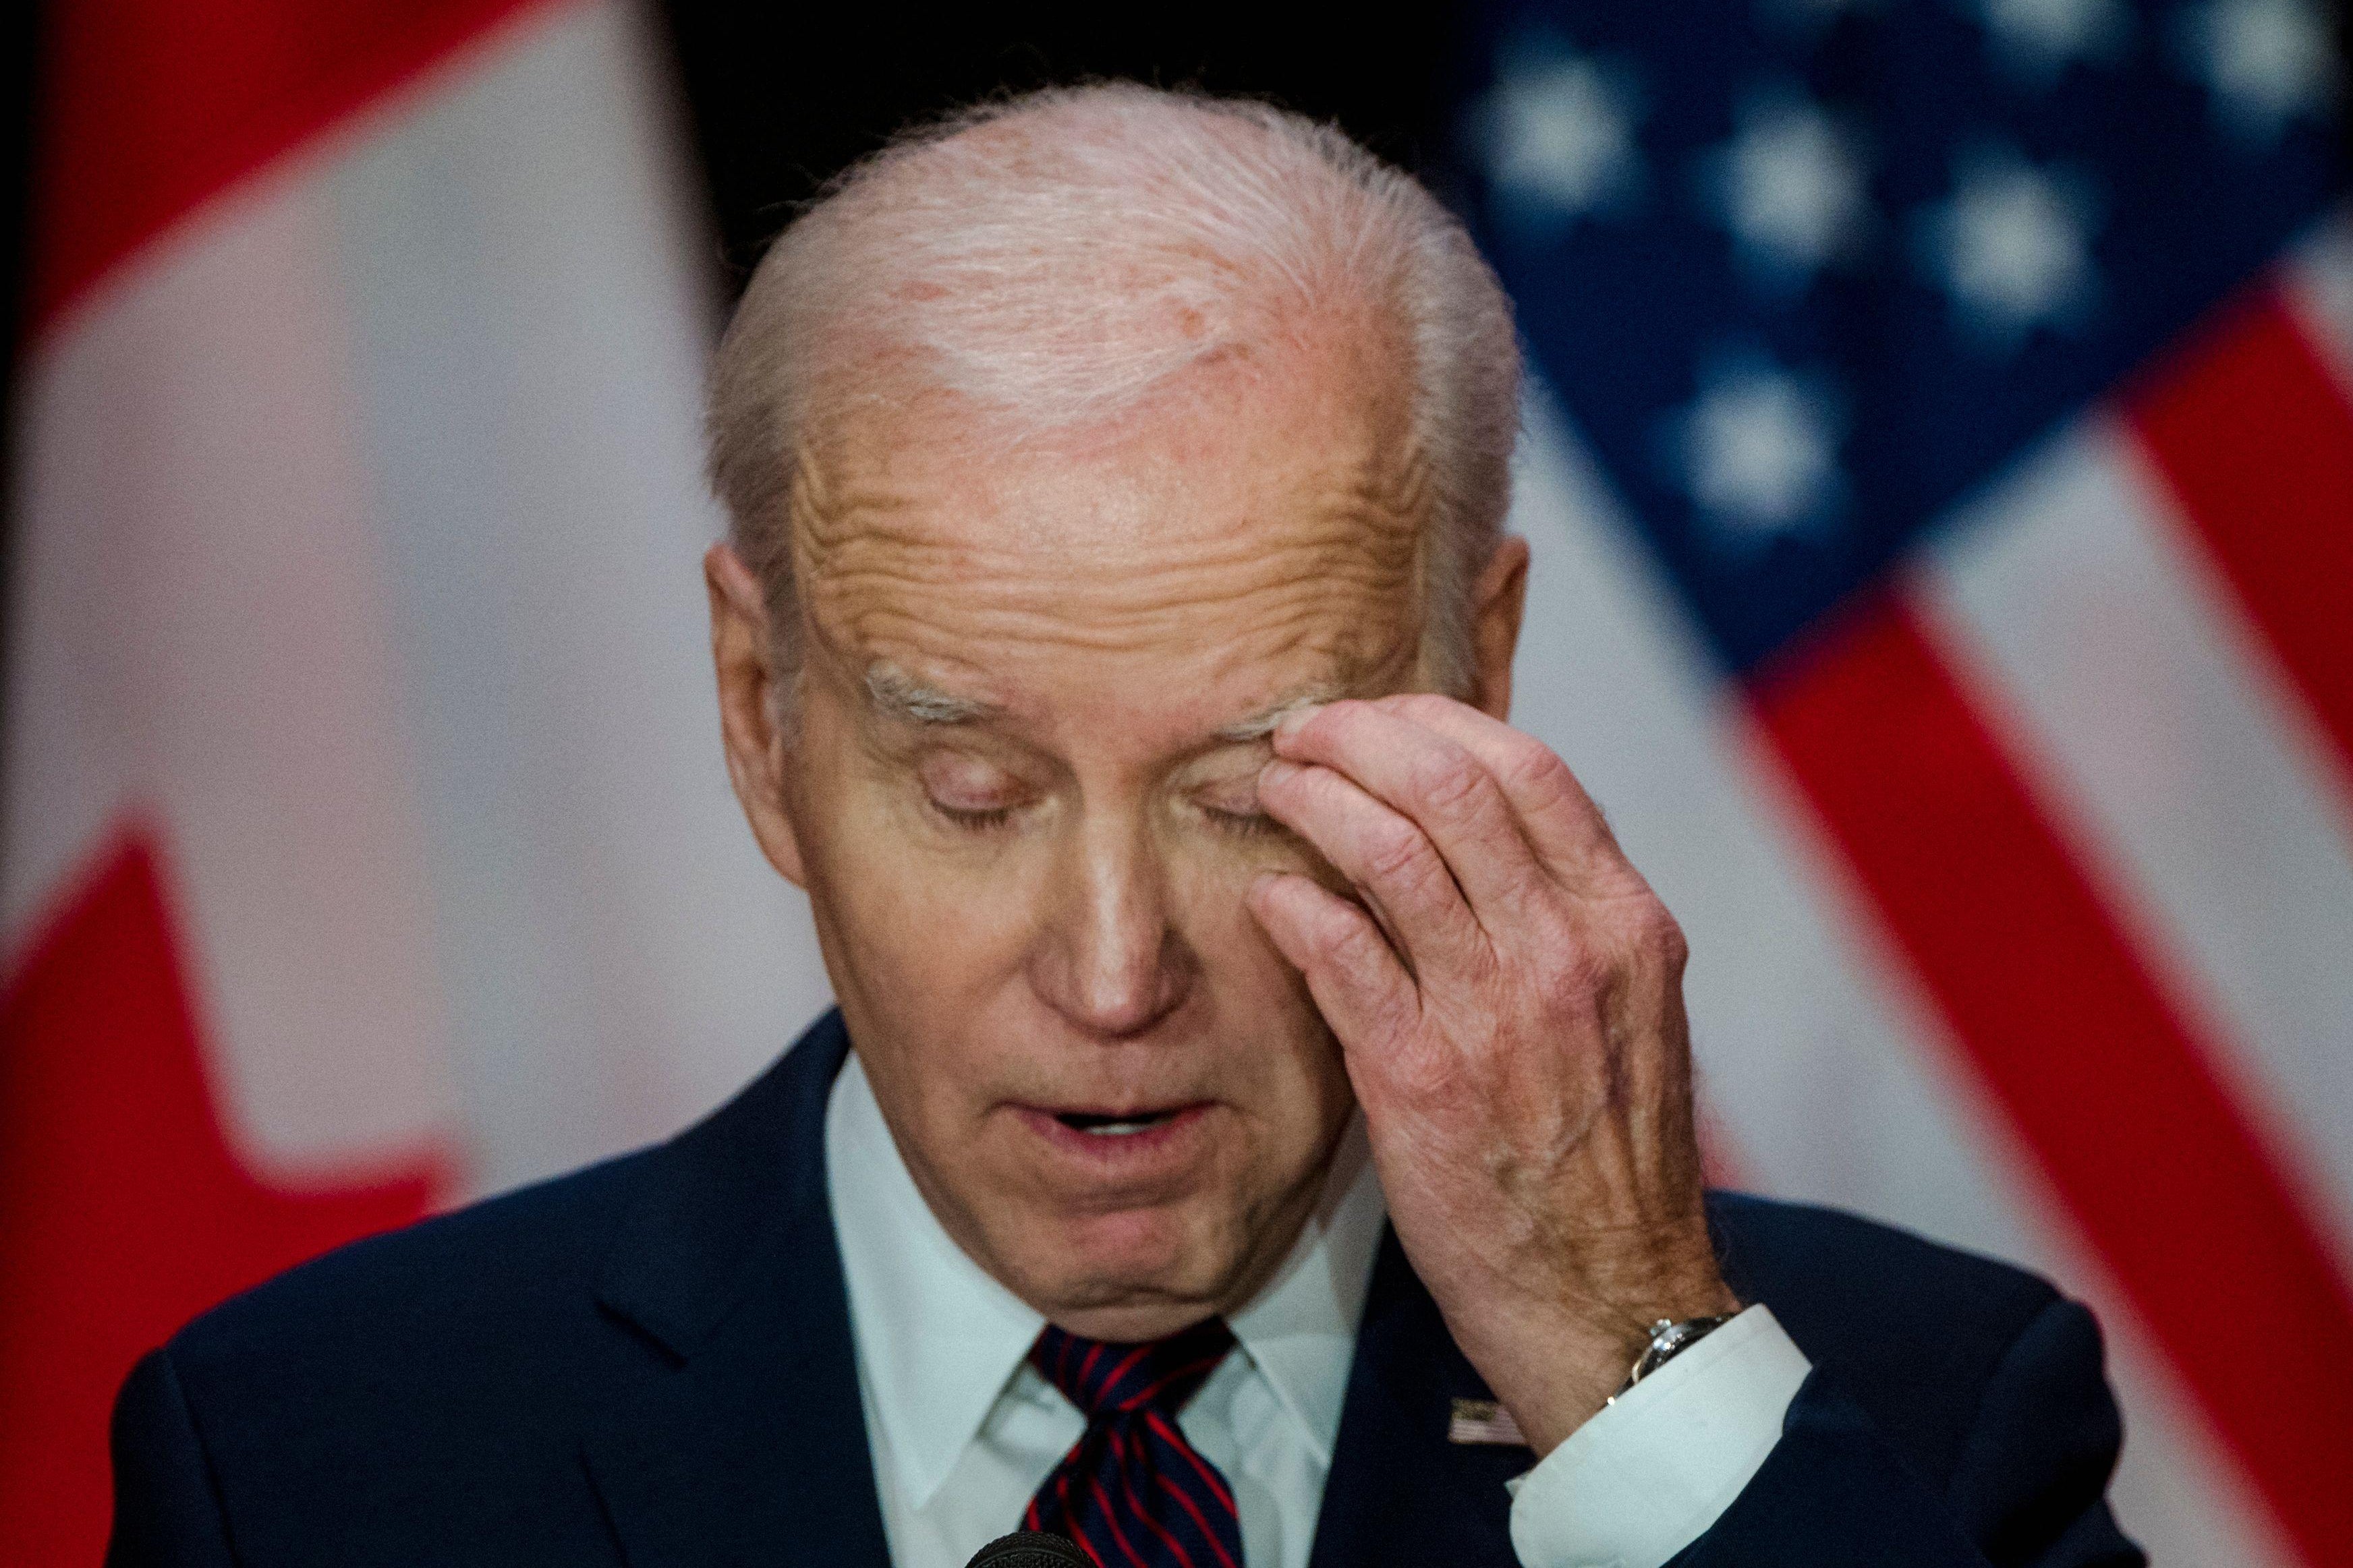 Biden looks down and scratches his left eye with his left hand